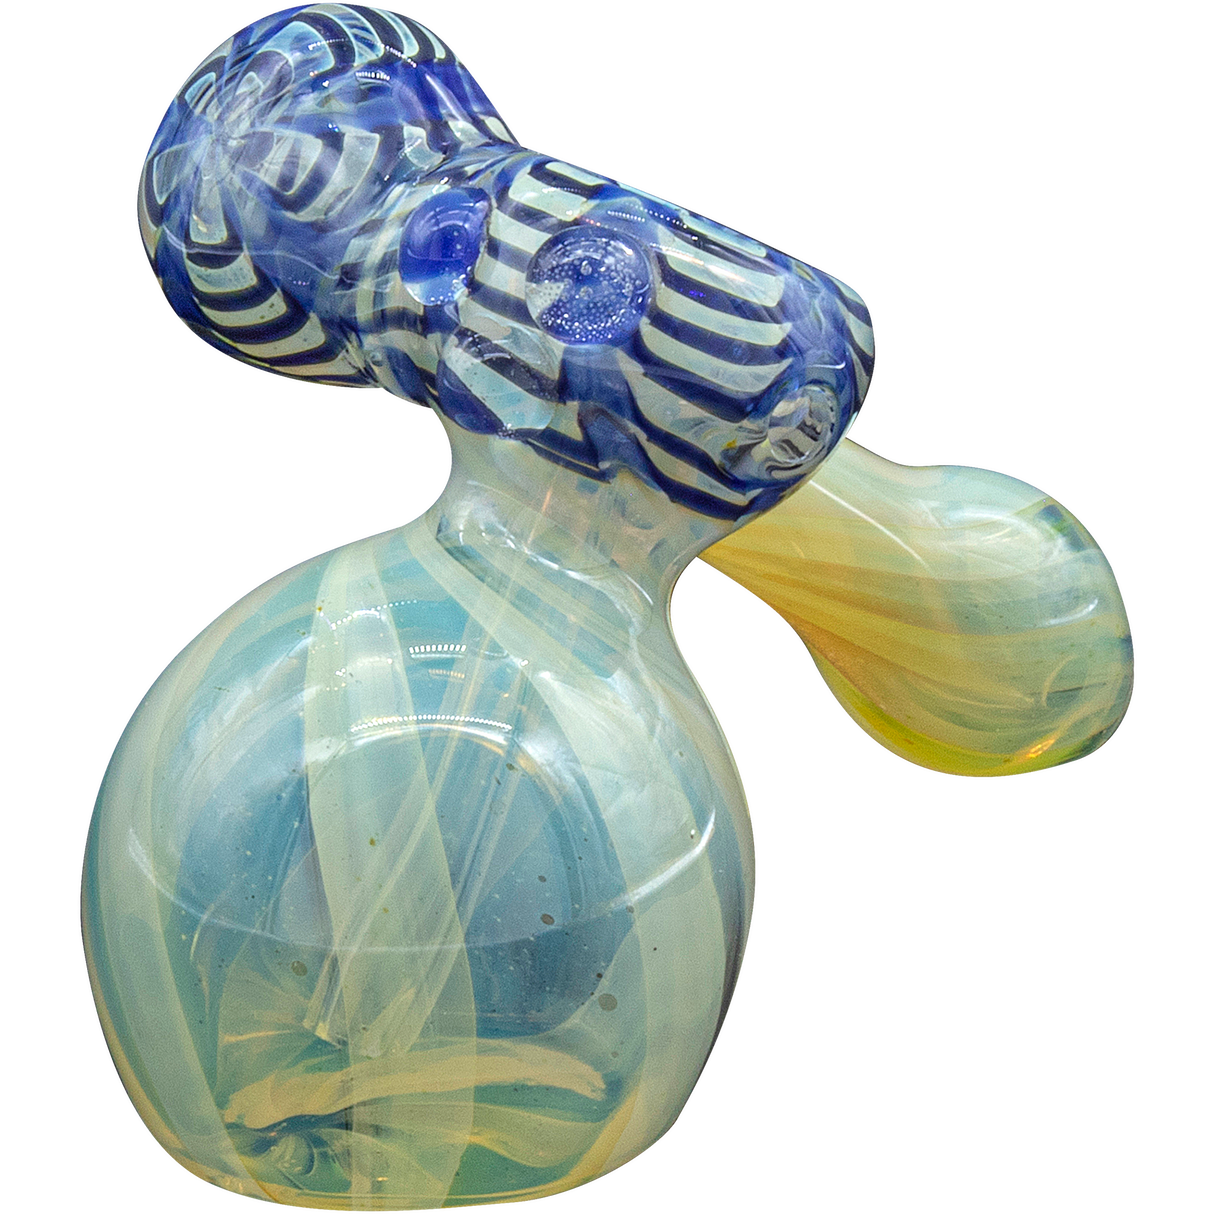 LA Pipes Raked Sidecar Bubbler in Fumed Glass with Blue Accents - Angled View